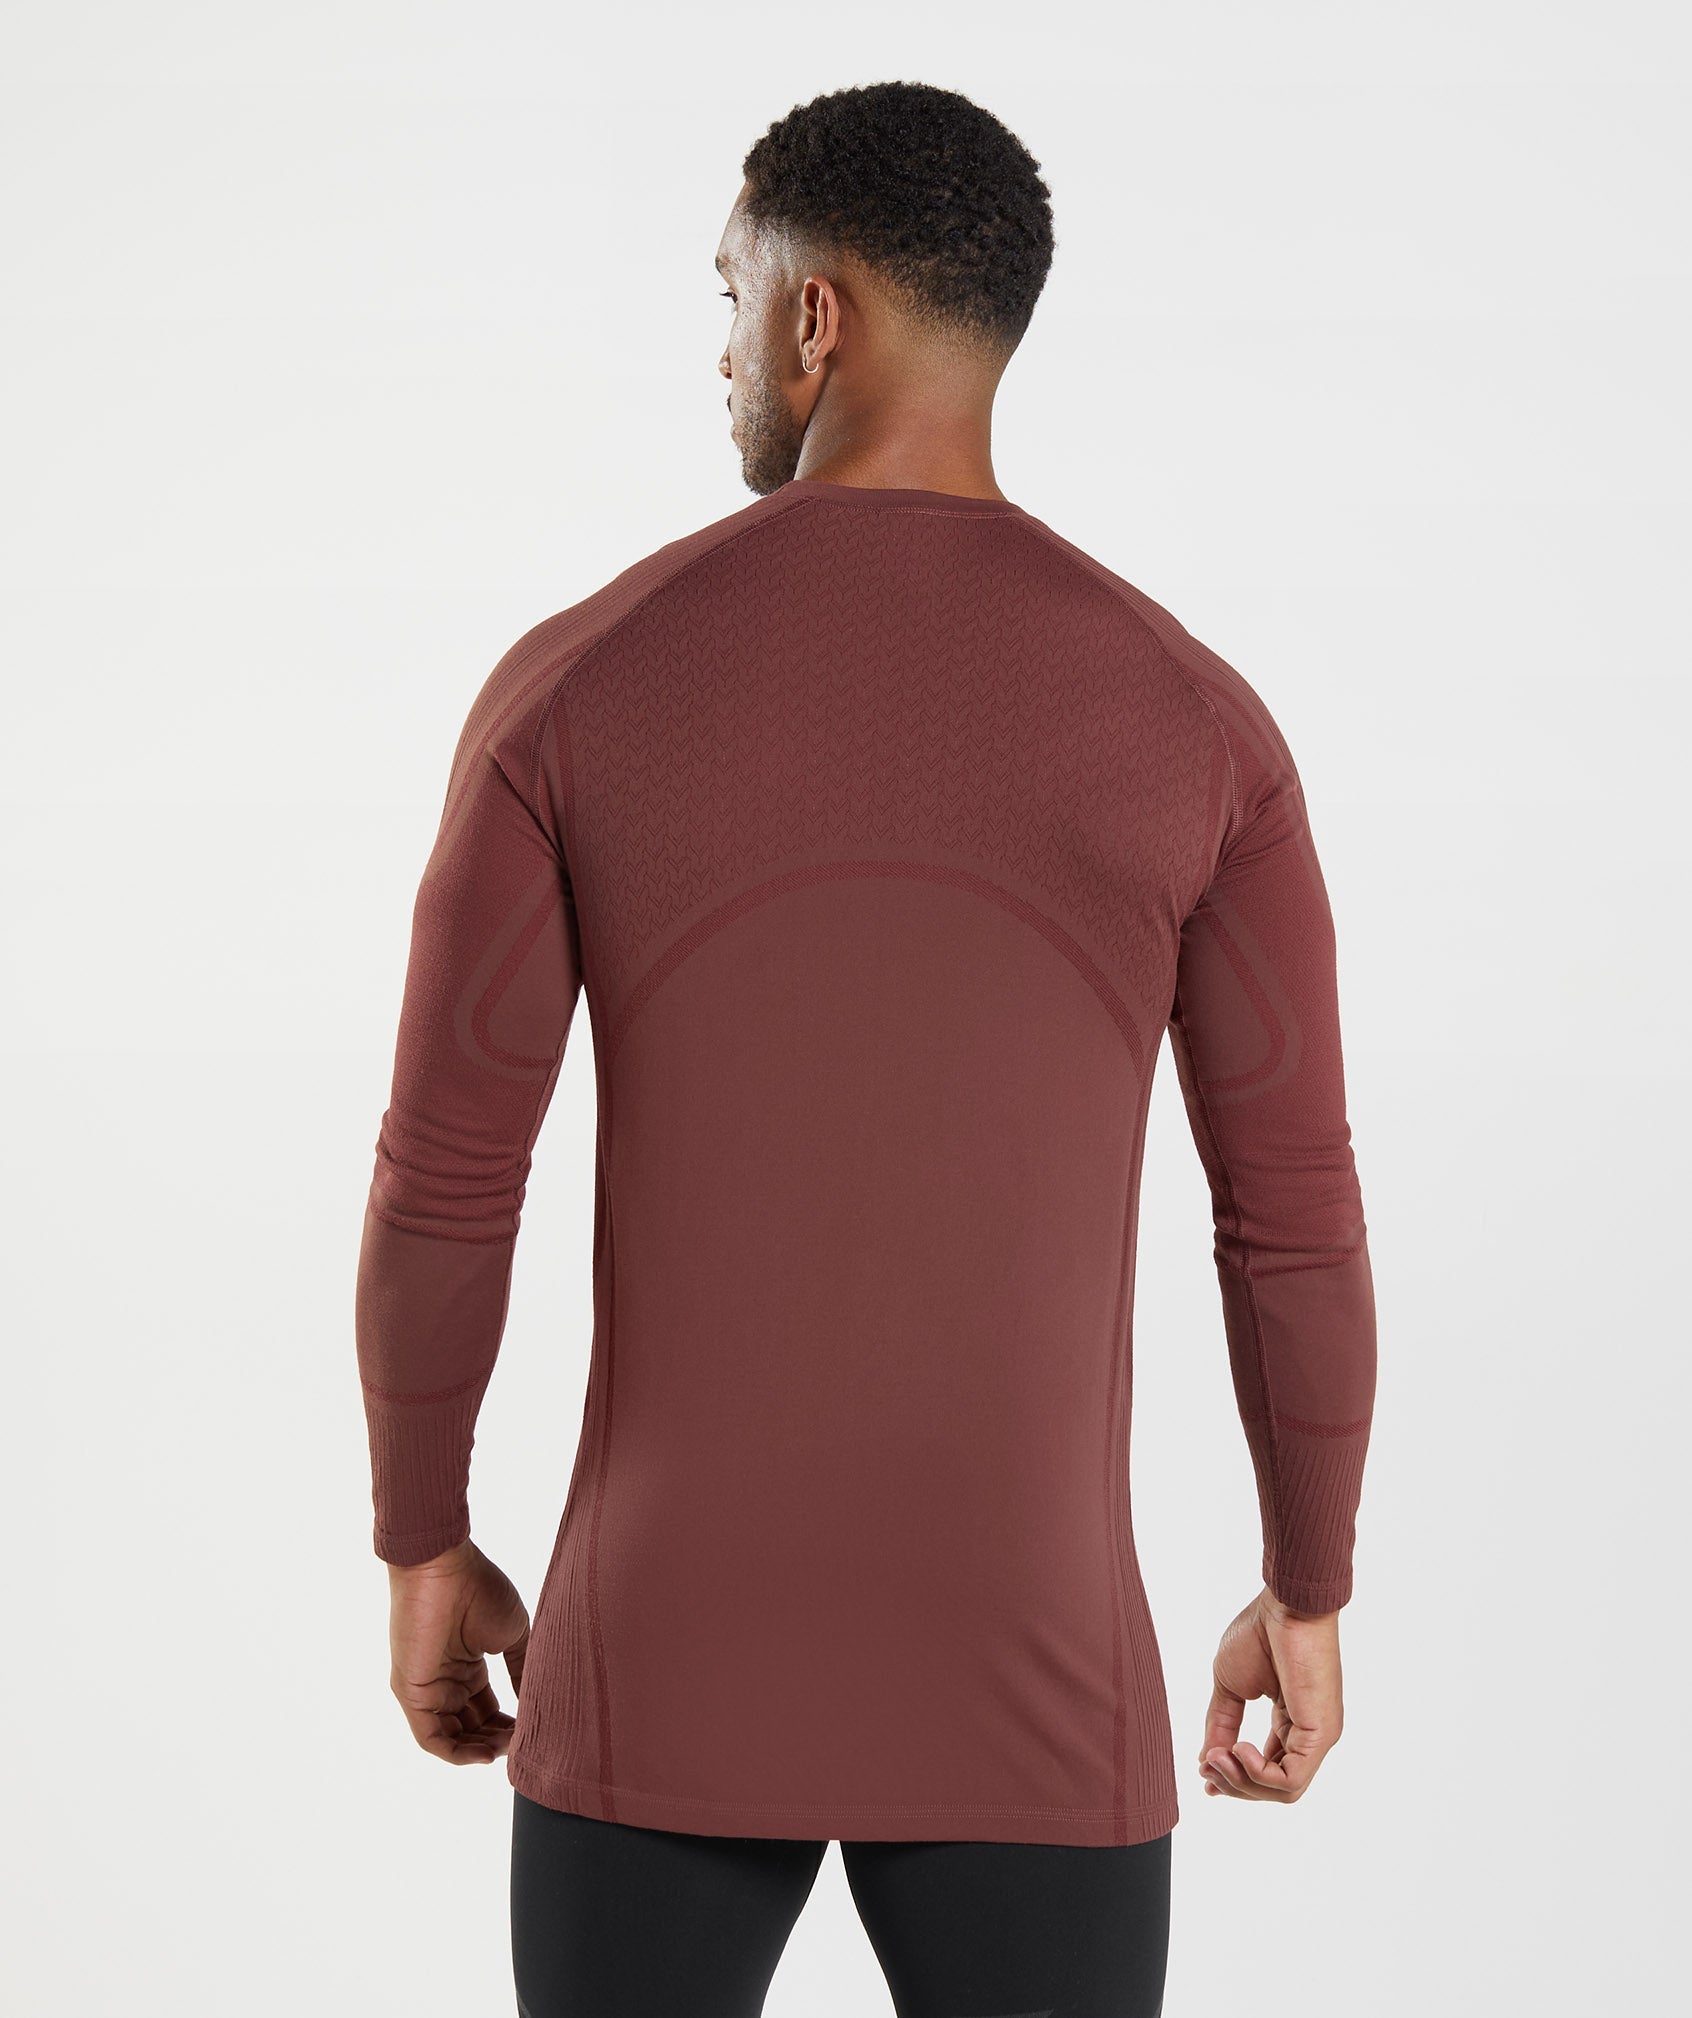 315 Long Sleeve T-Shirt in Cherry Brown - view 2